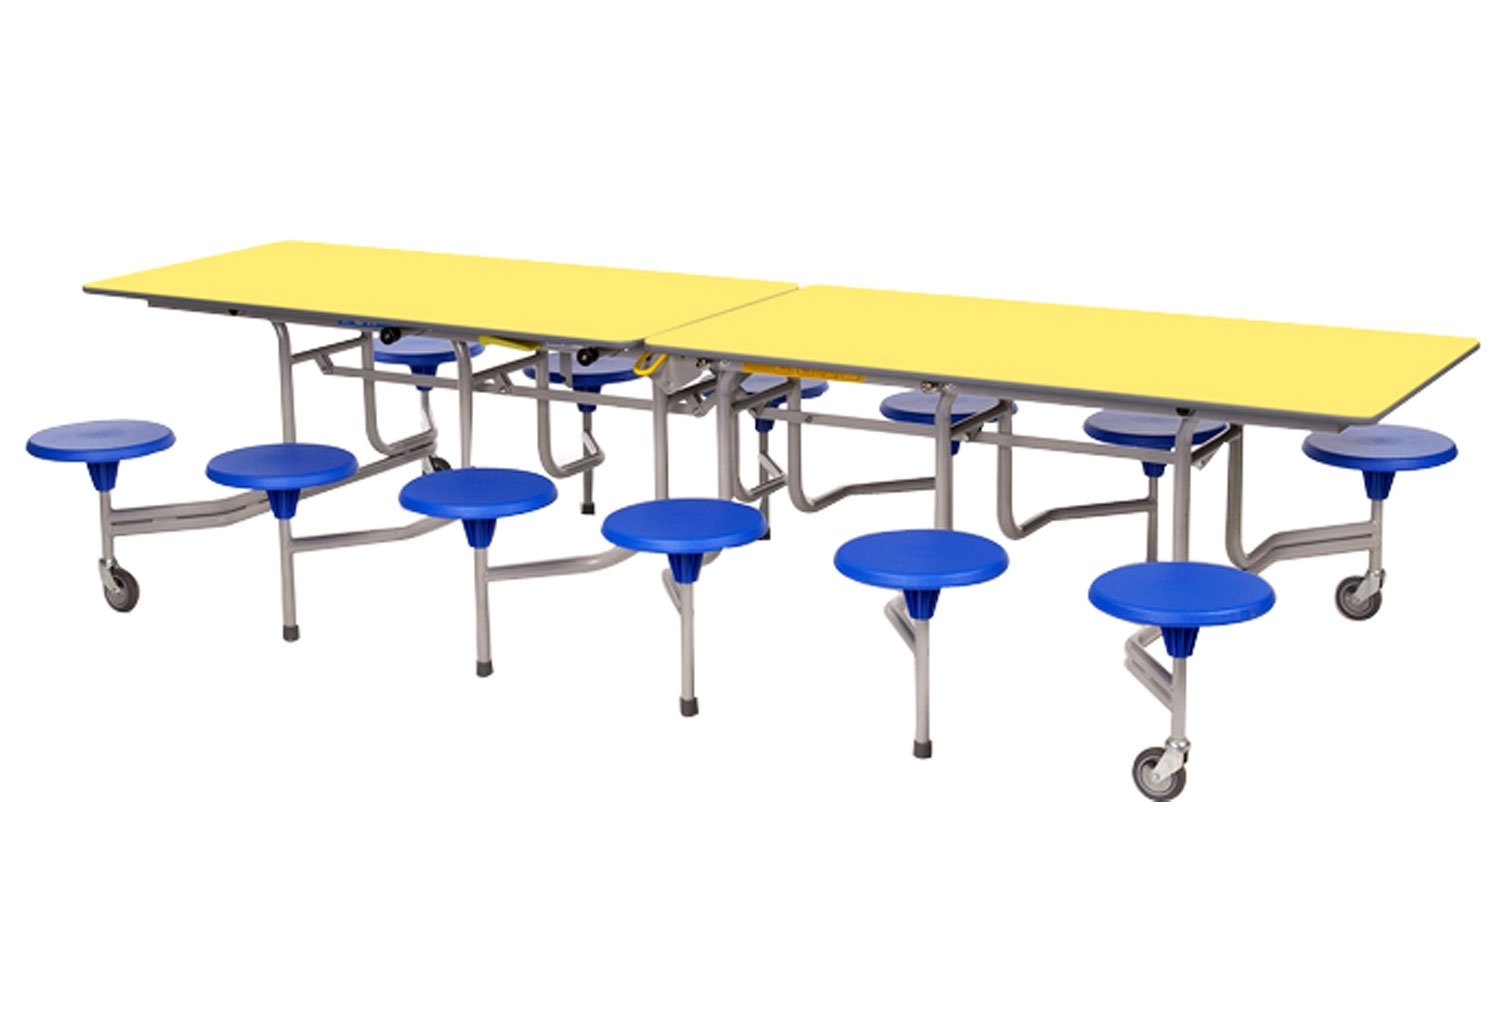 Sico Rectangular Table Seating Unit With 12 Seats, 74 (cm), Blue Silk Top, Black Seats